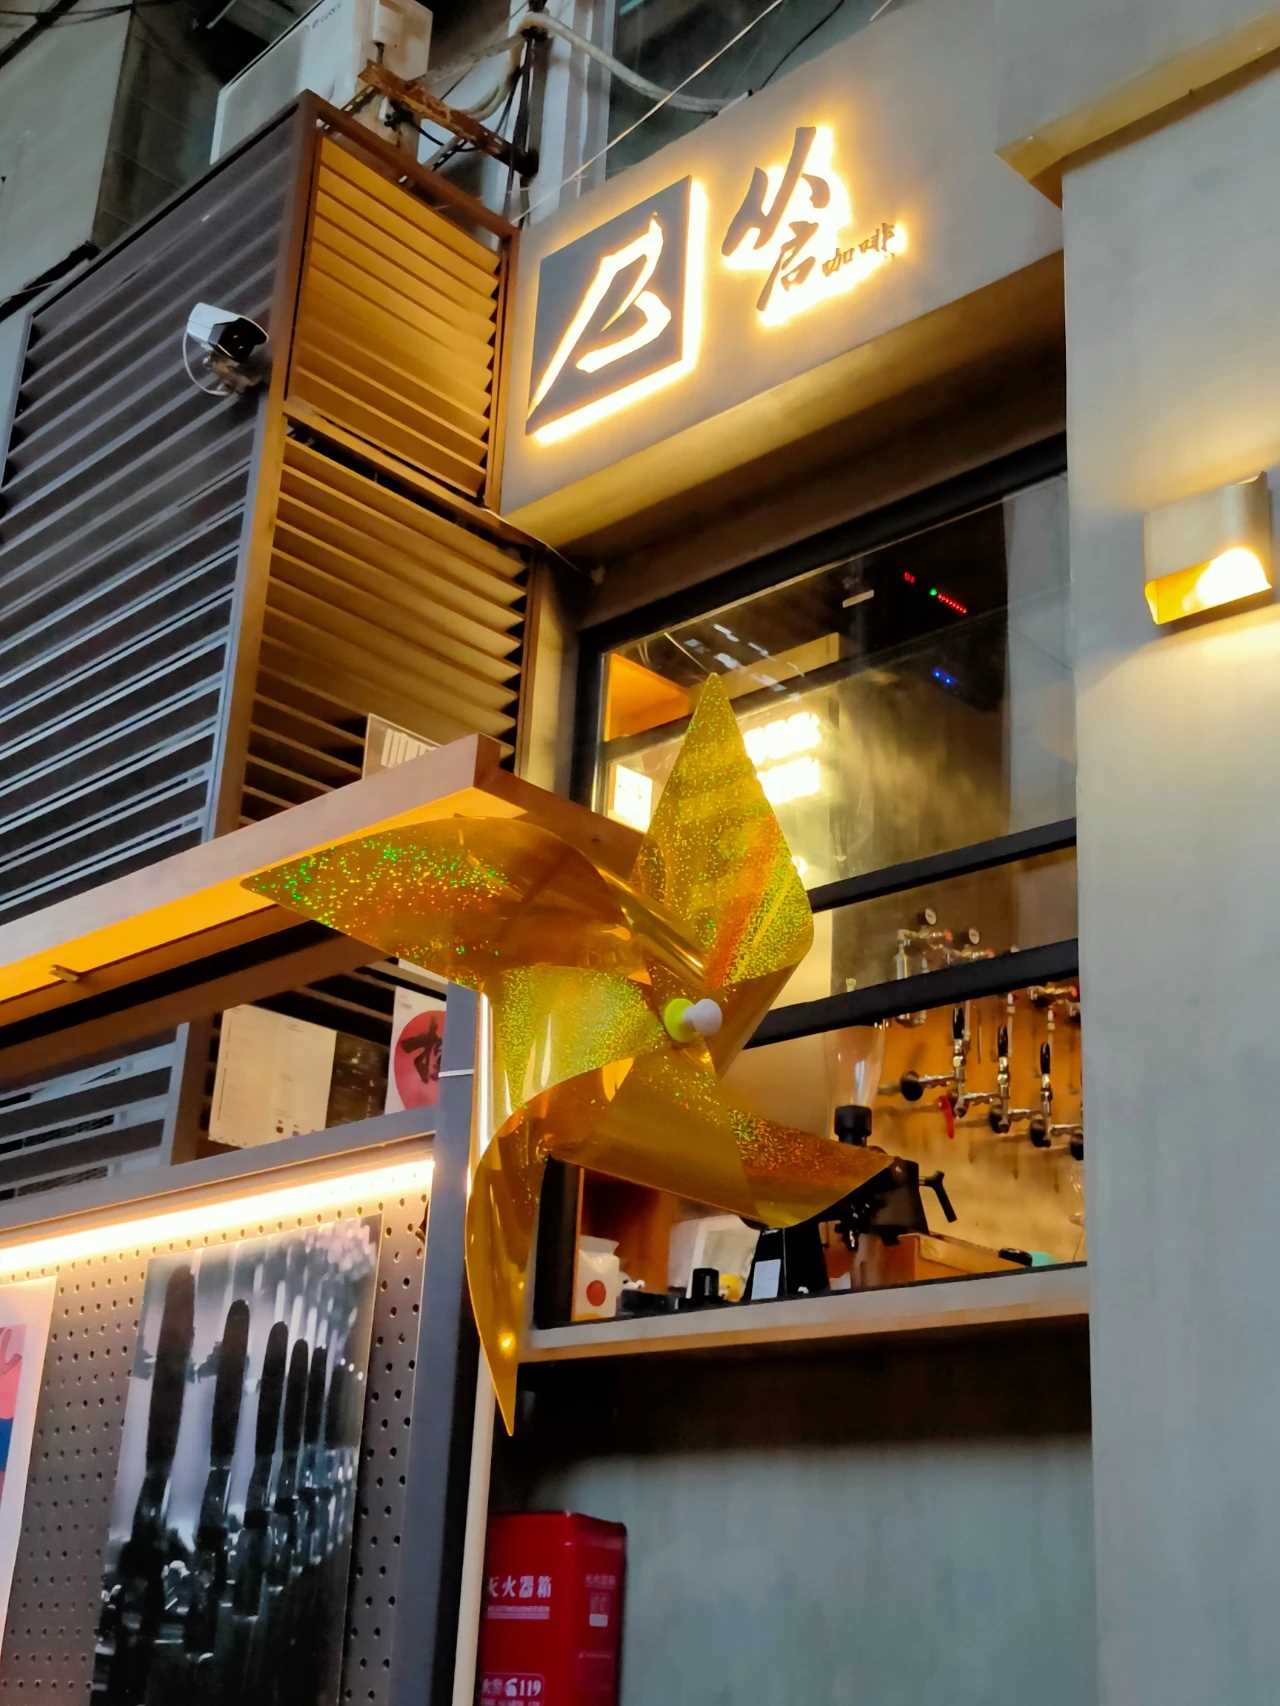 Guangzhou Industrial Cafe recommends 